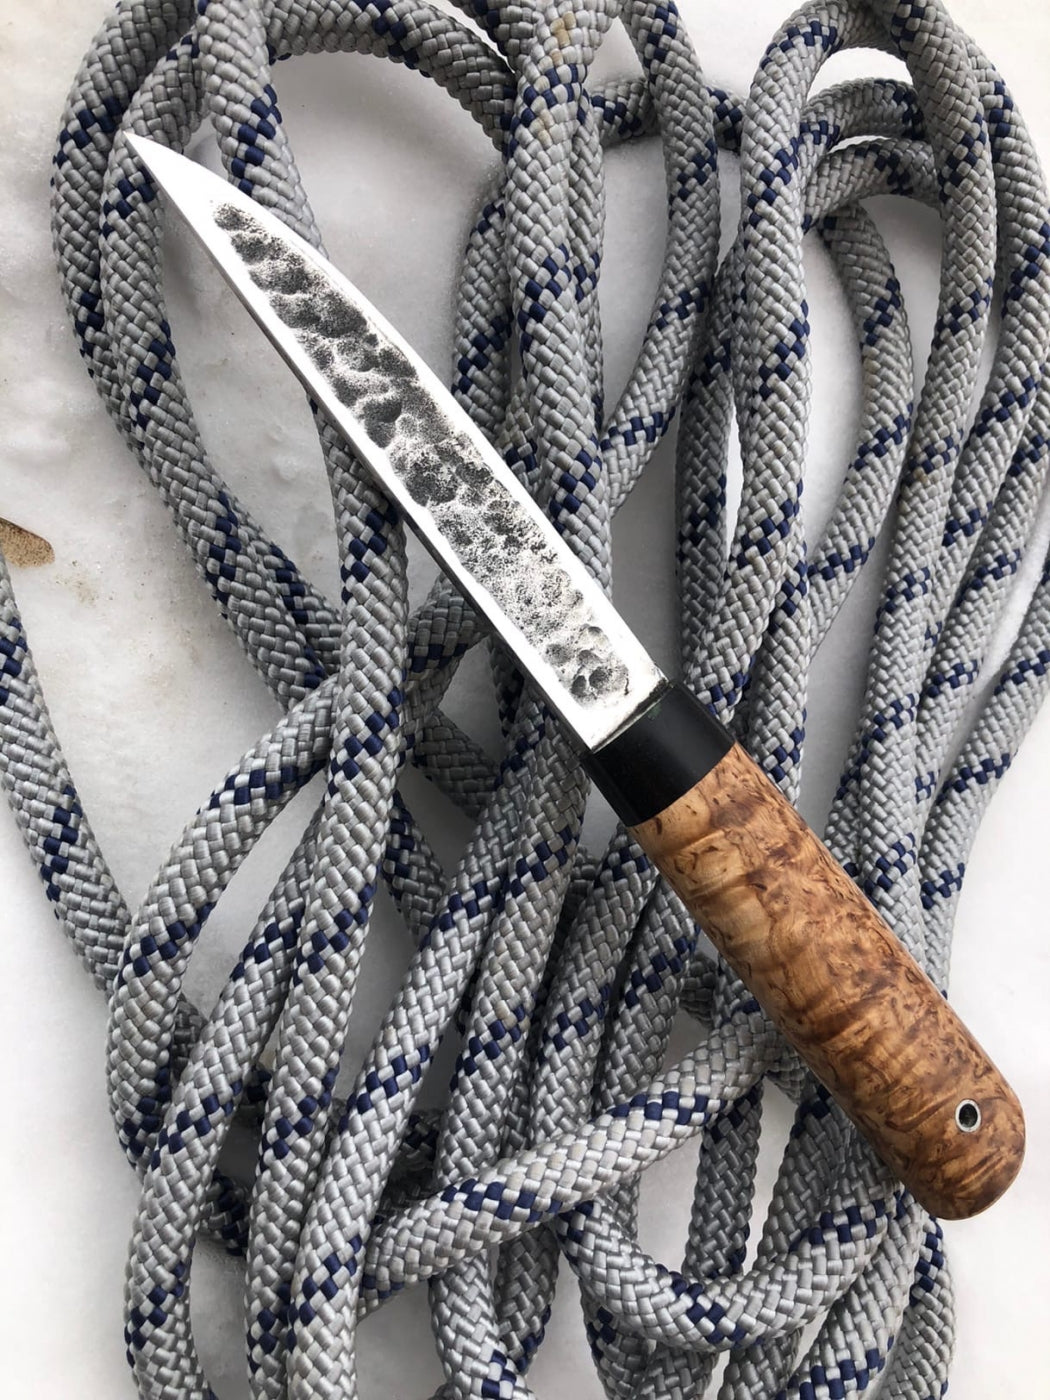 Yakuto Hunting Knife with Artistic Engraving